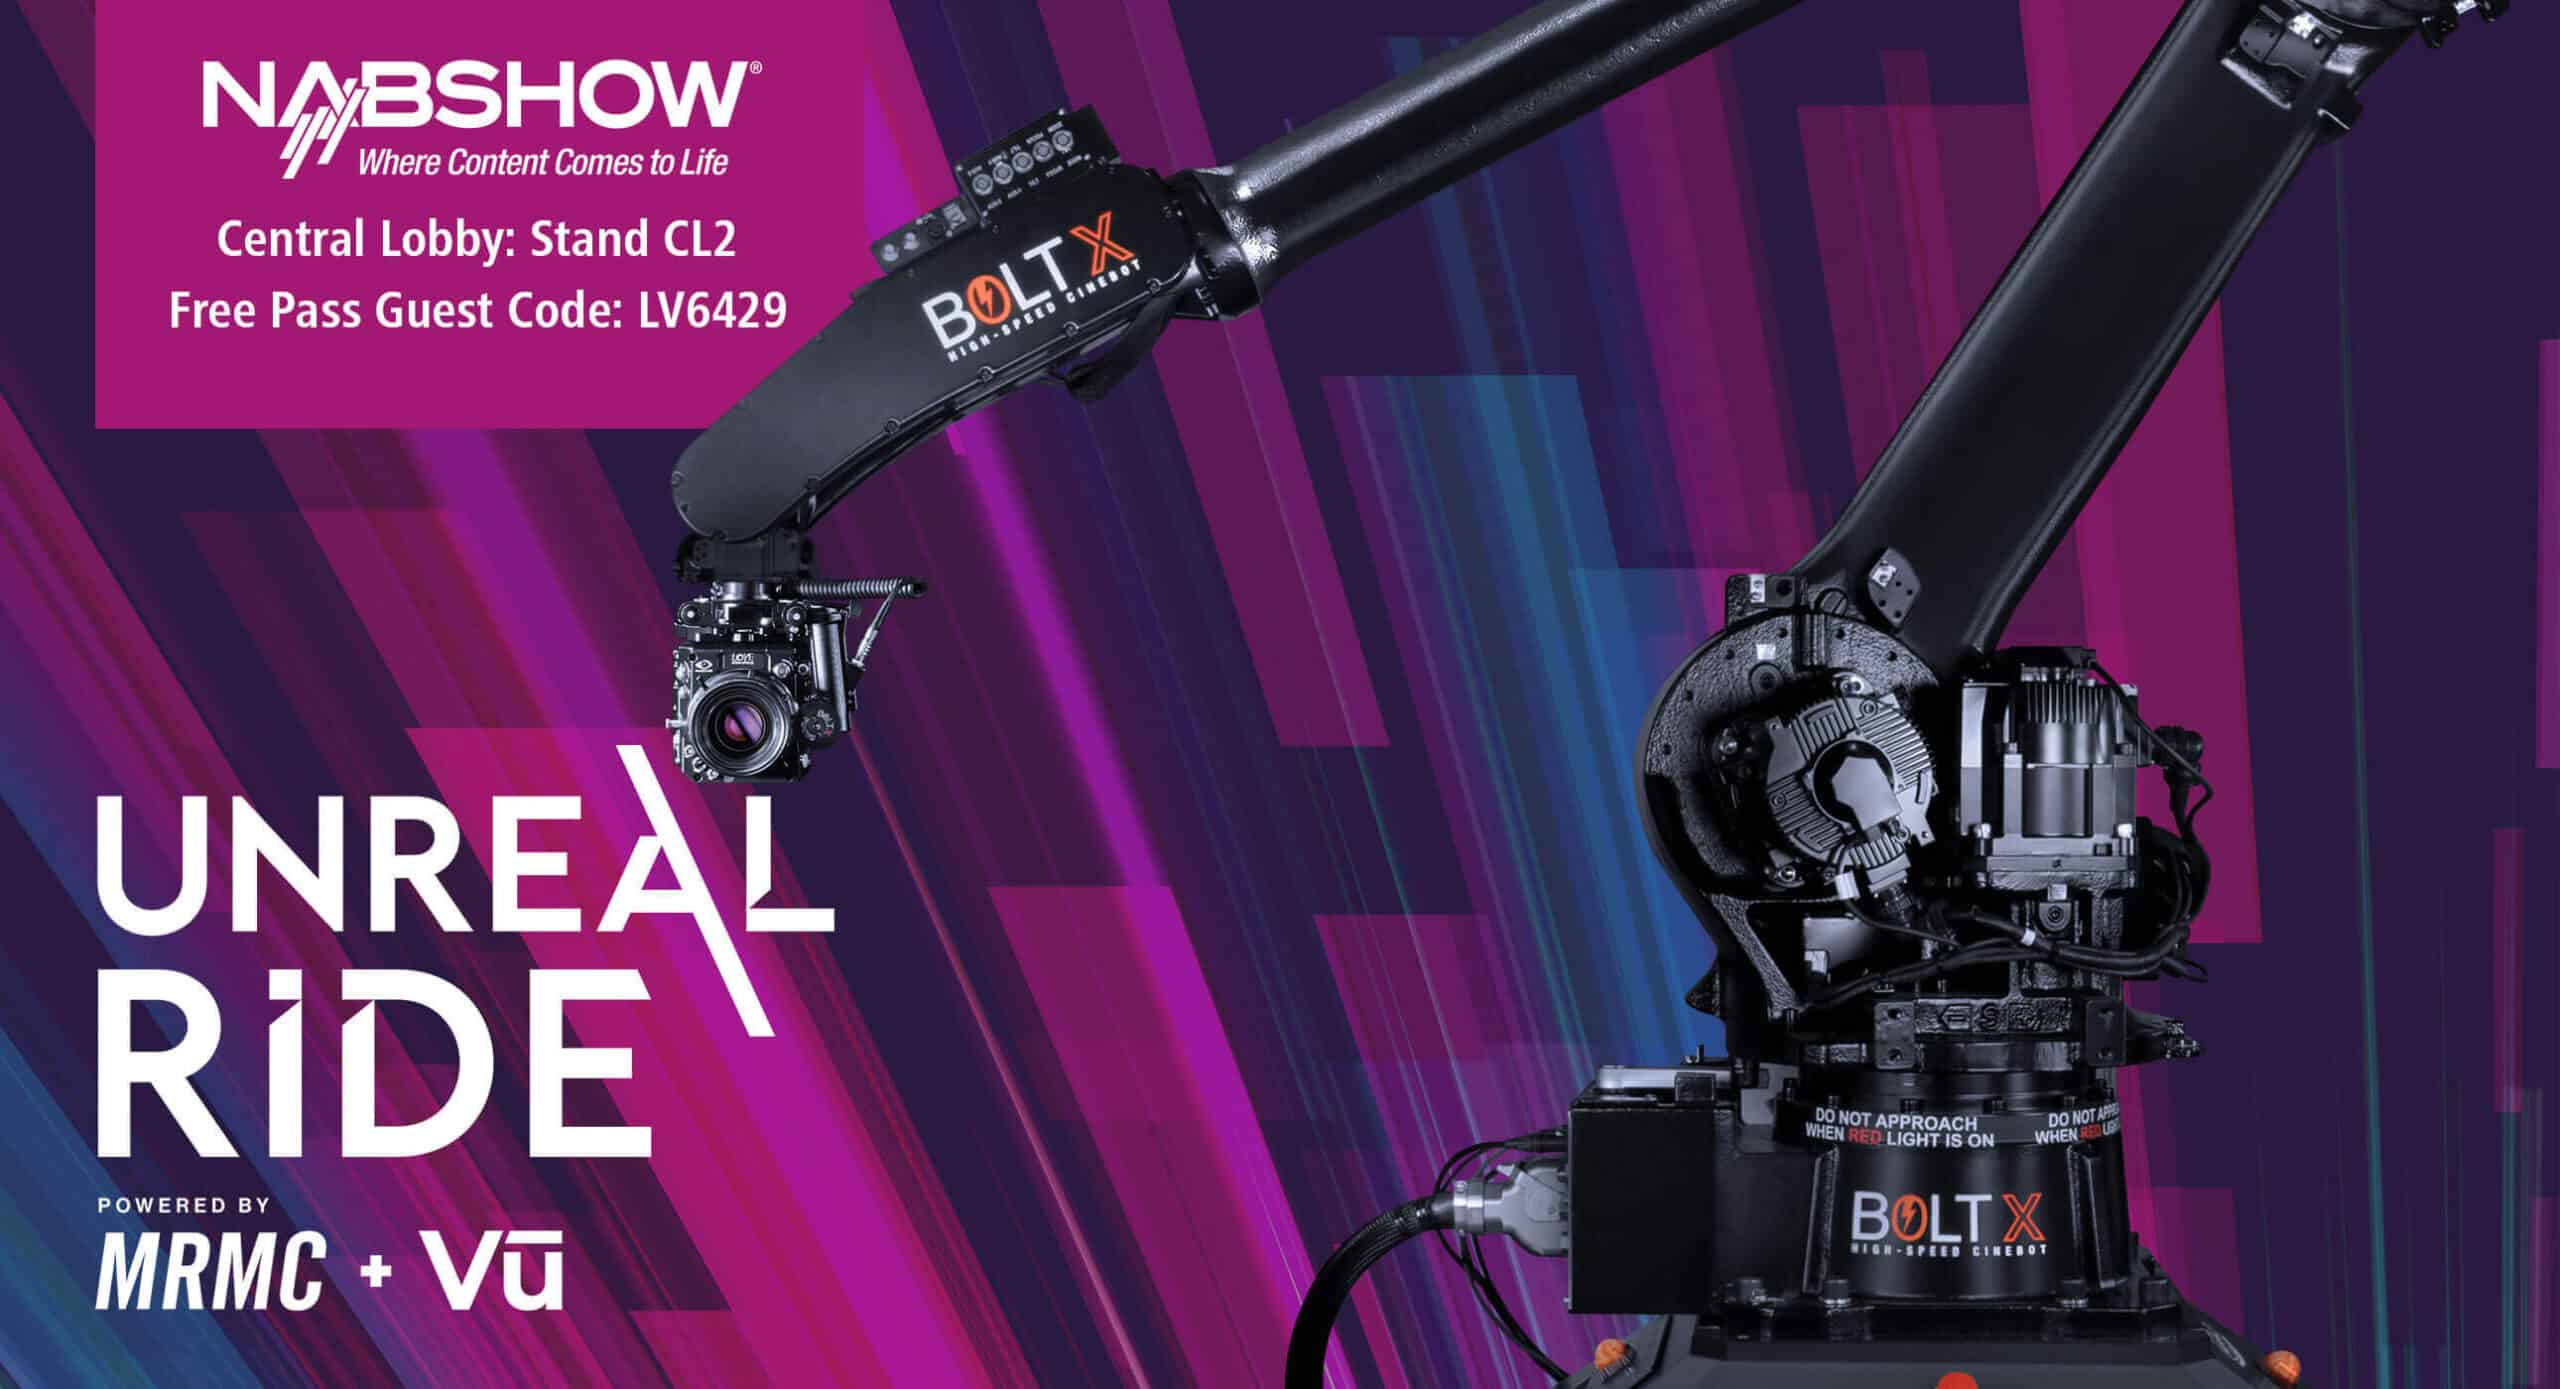 JOIN US AT NAB SHOW FOR THE UNREAL RIDE